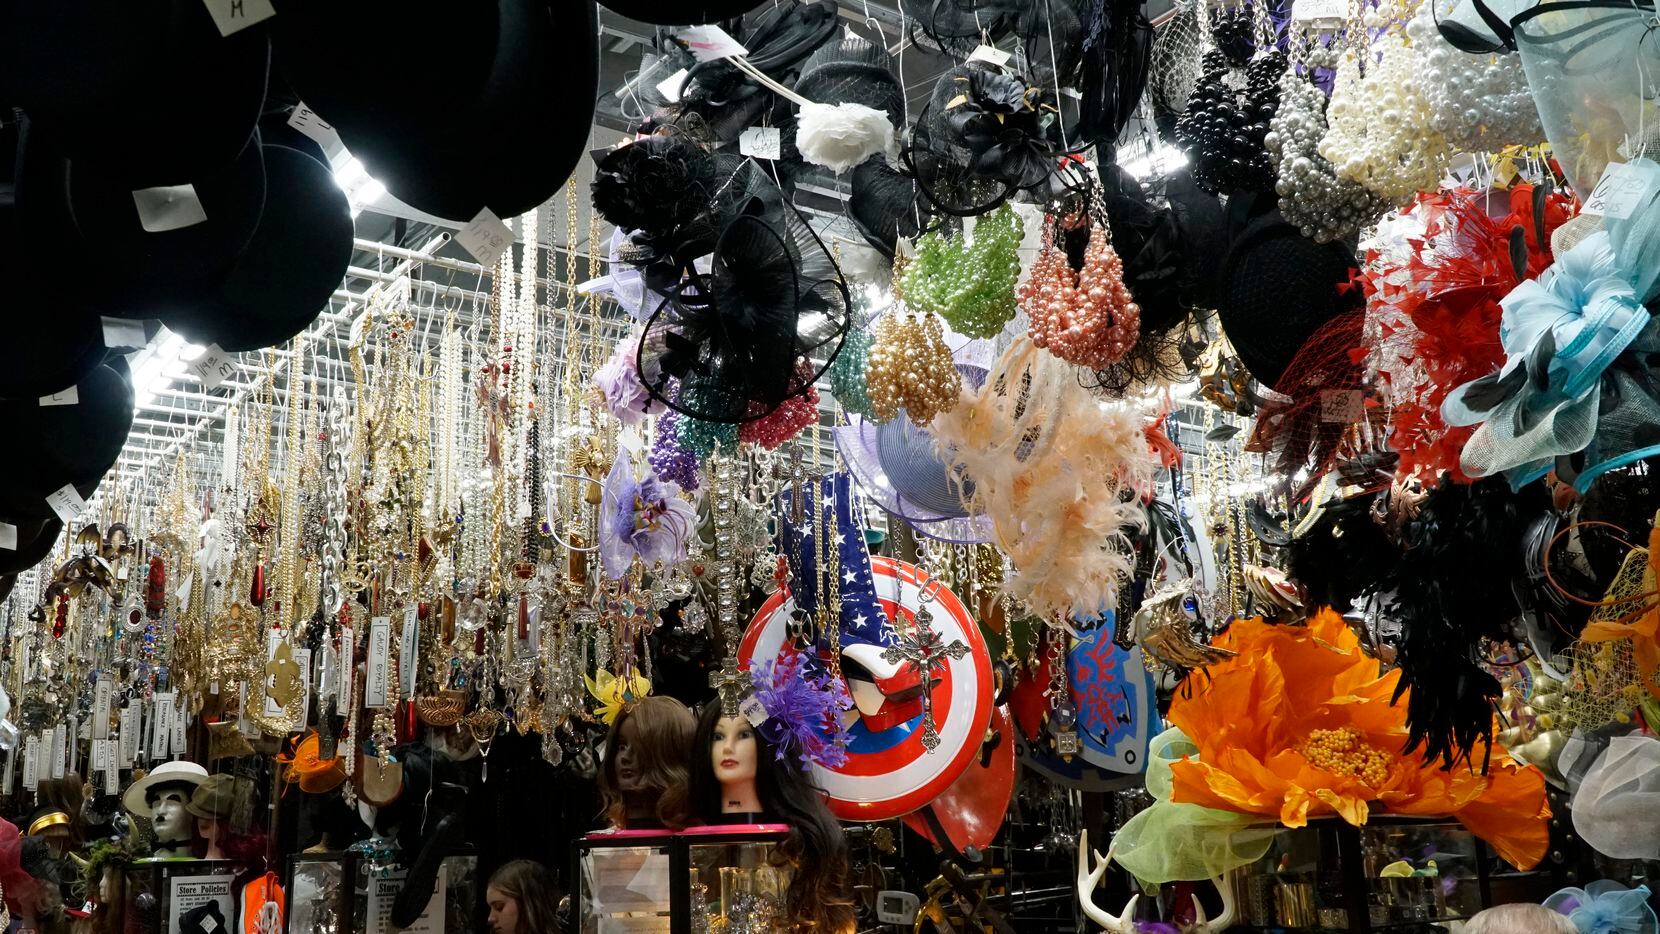 Customers can find all things costume at Dallas Vintage Shop in Plano.